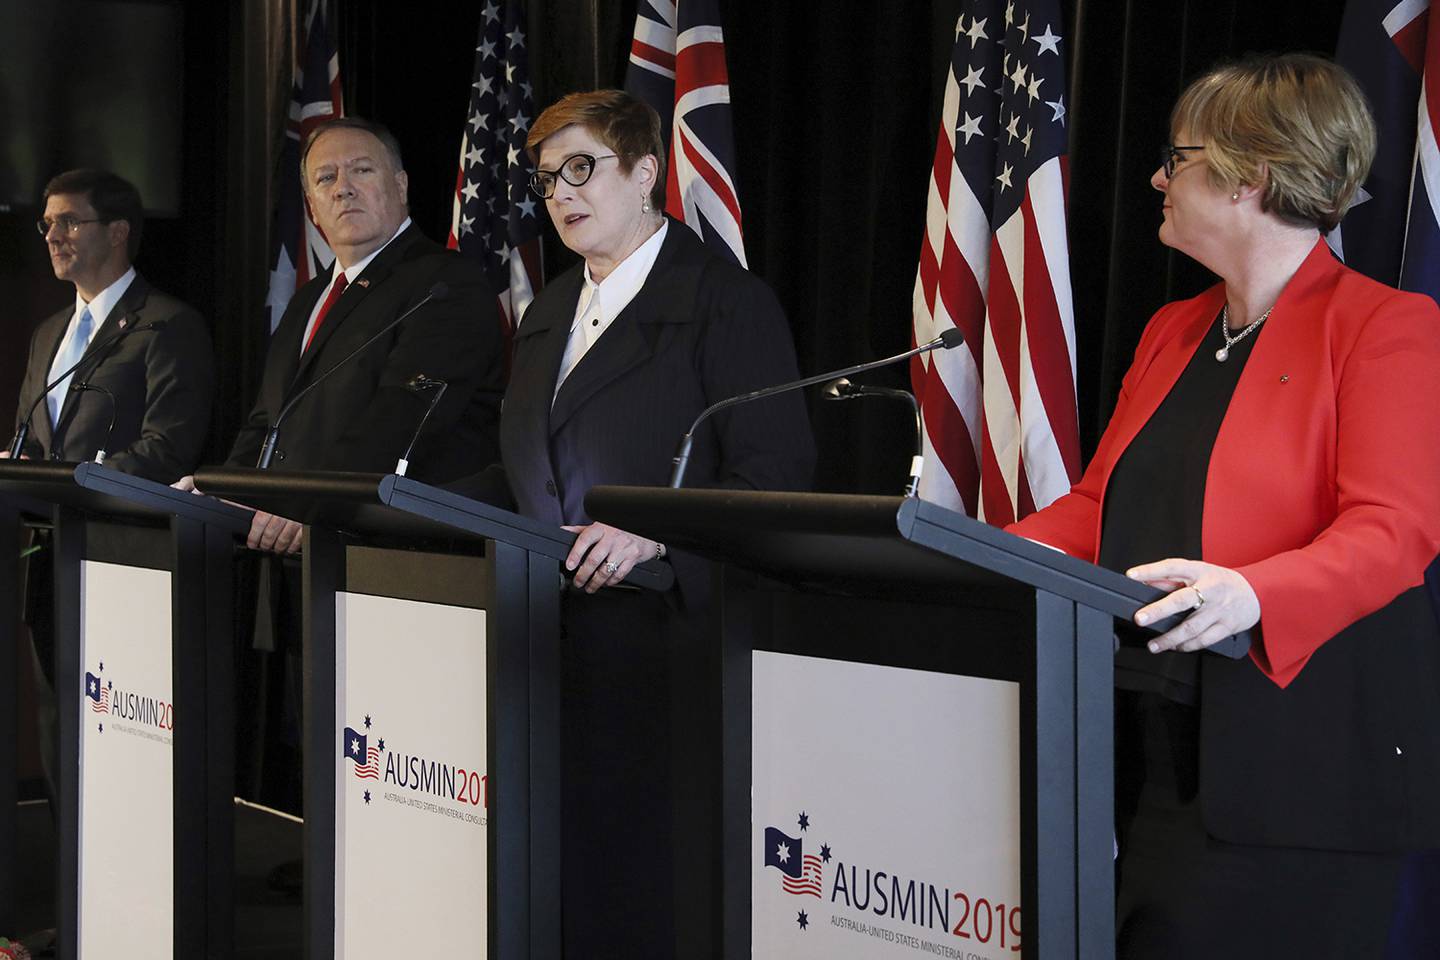 Australia's Foreign Minister Marise Payne, second from right, speaks during a joint news conference with U.S. Secretary of Defense Mark Esper, left, U.S. Secretary of State Mike Pompeo, second from left, and Australia's Defense Minister Linda Reynolds in Sydney, Australia, Sunday, Aug. 4, 2019.